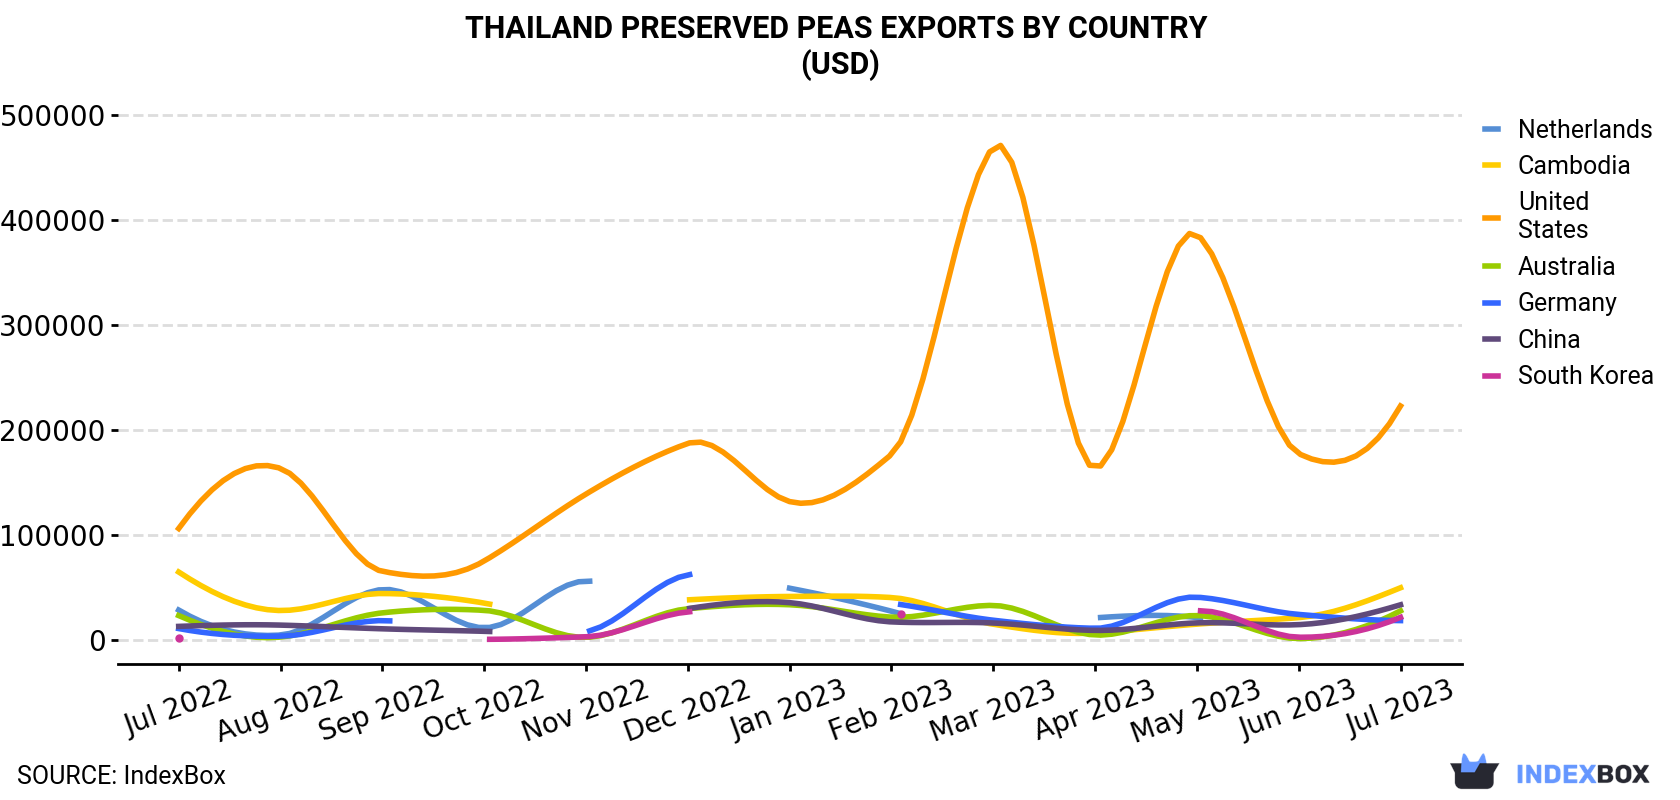 Thailand Preserved Peas Exports By Country (USD)